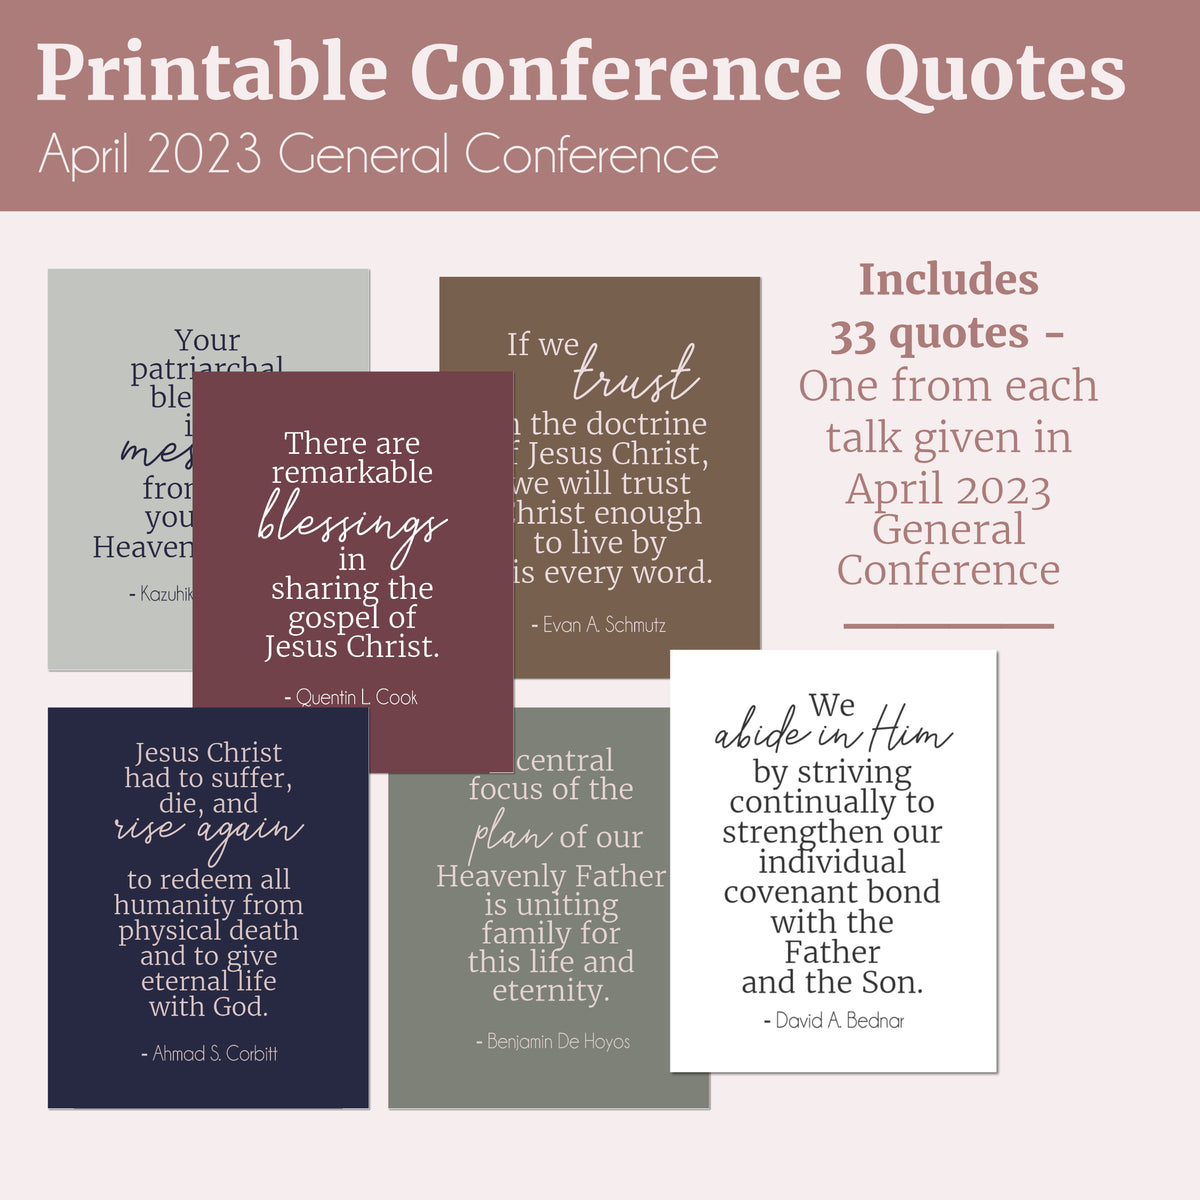 April 2023 General Conference Printable Quotes My Upside Down Umbrella